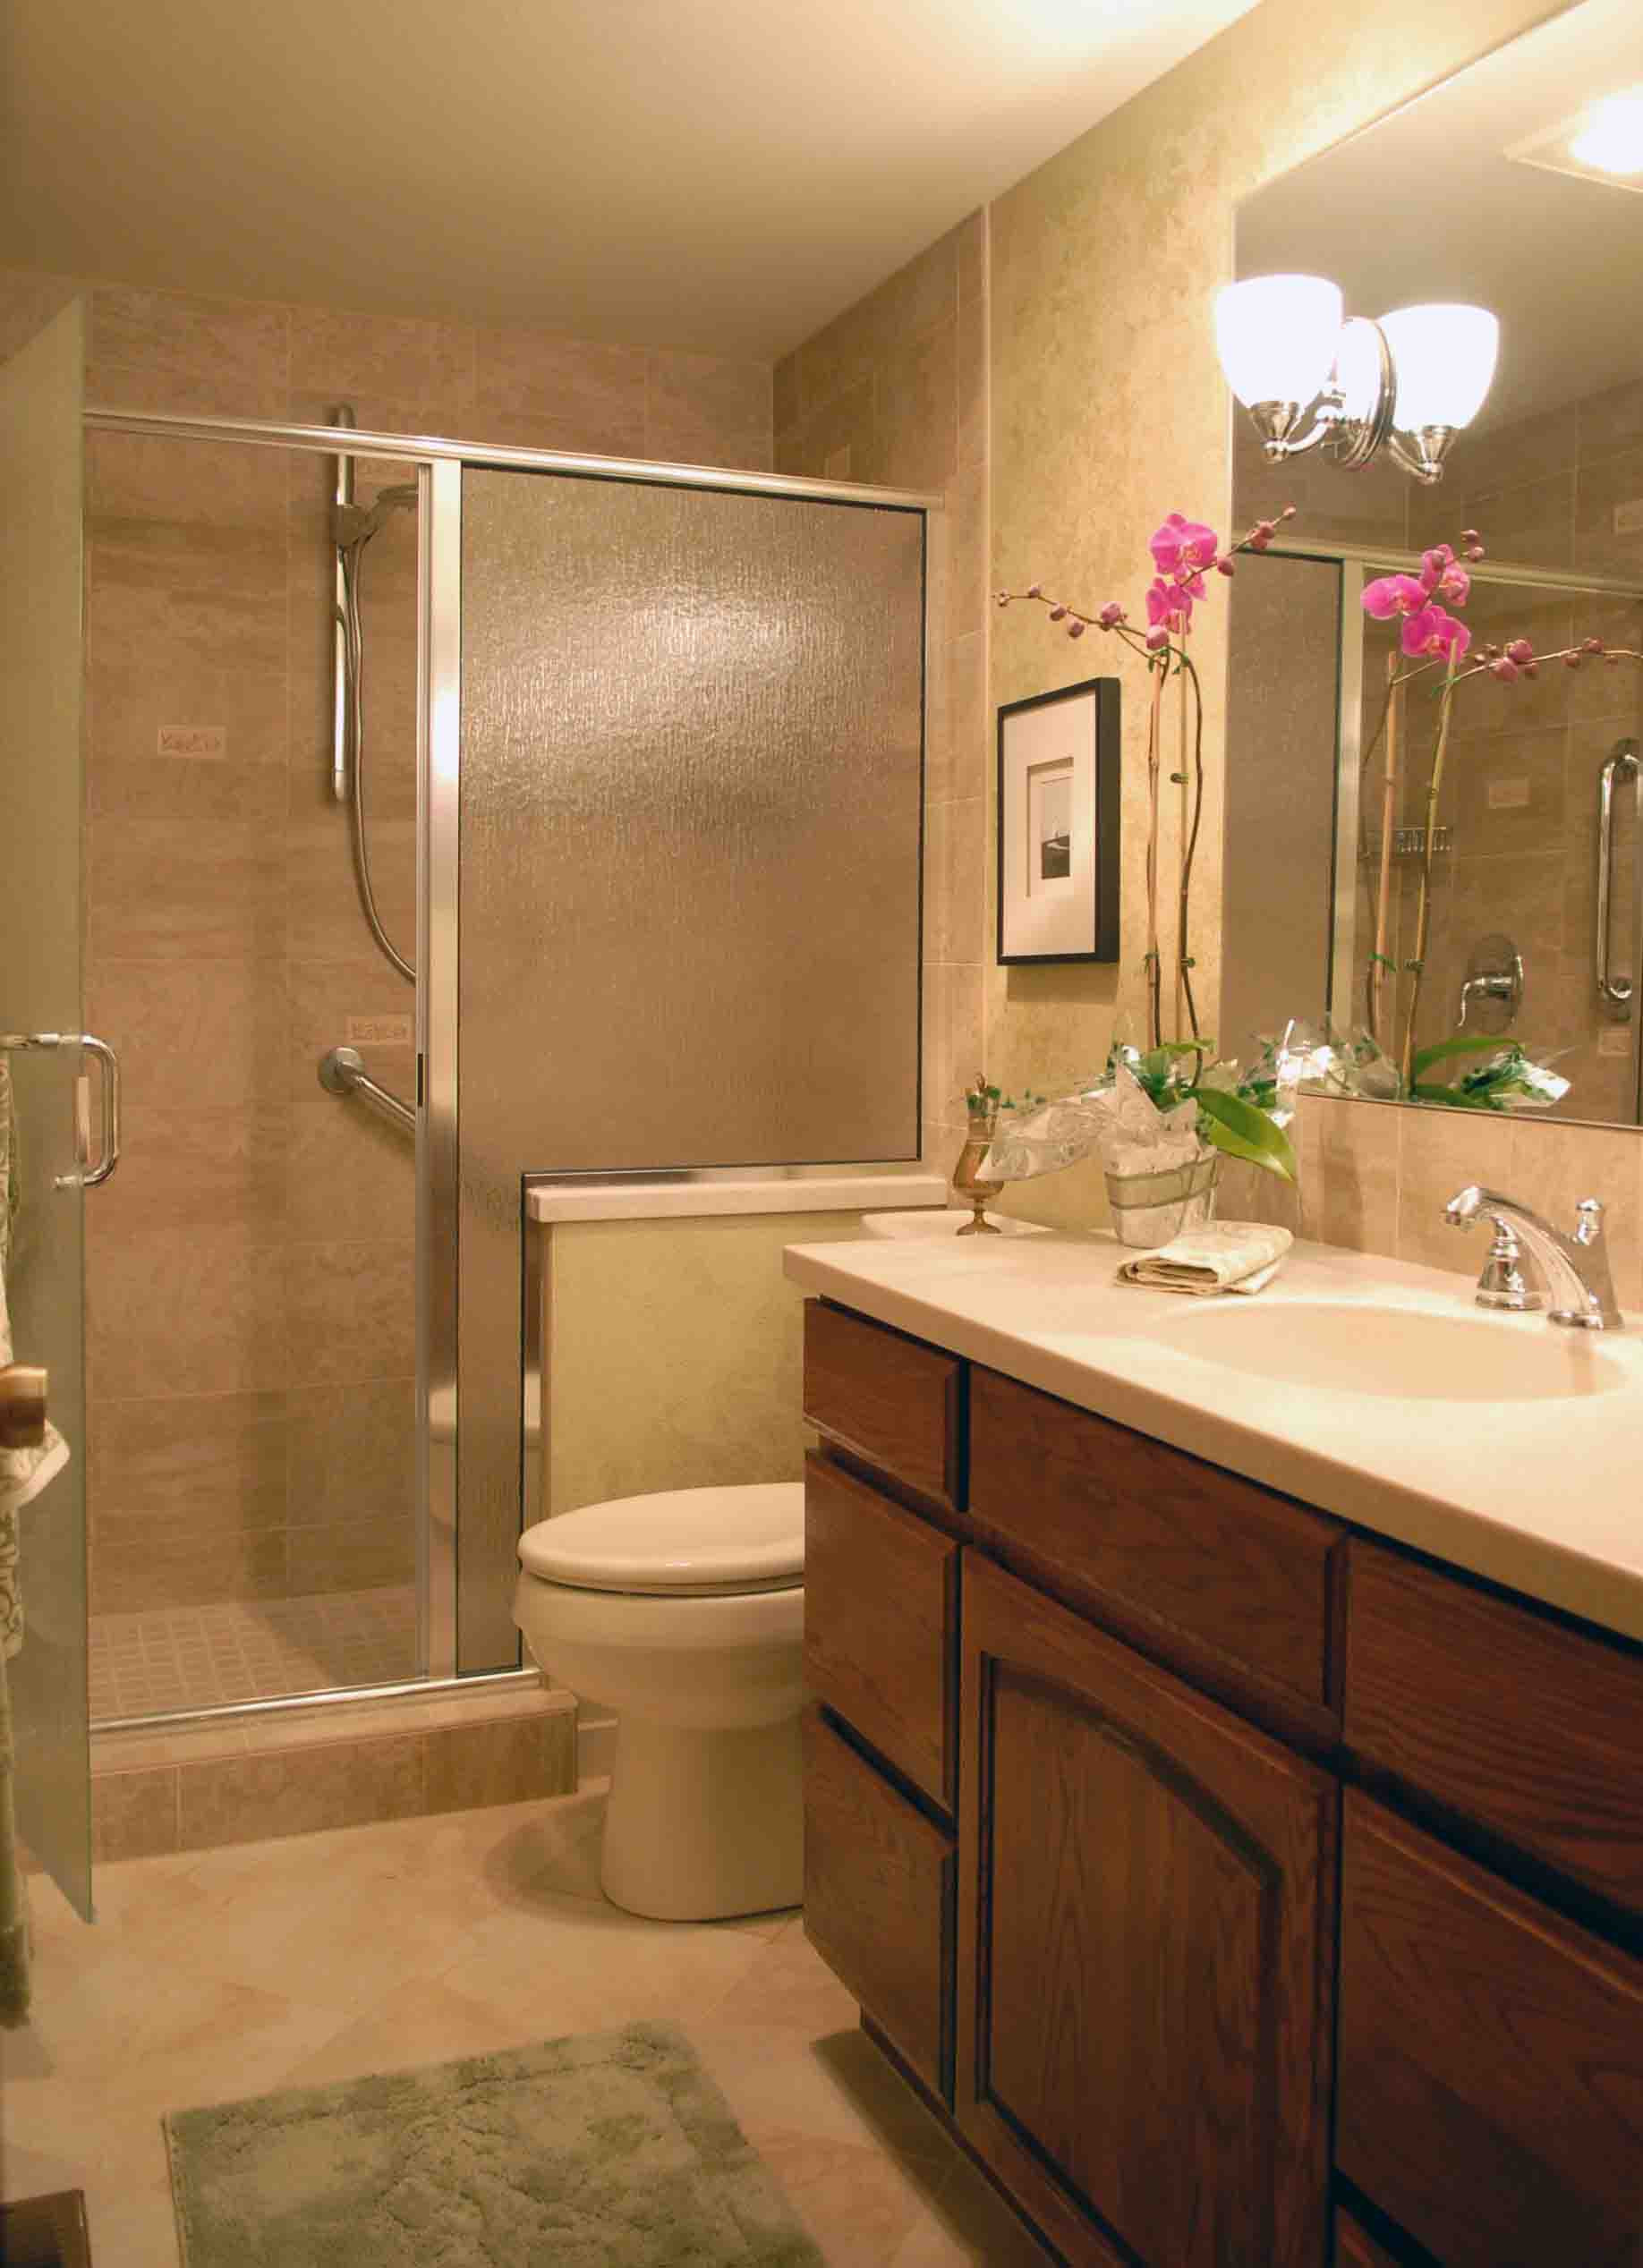 Bathroom Decor Pictures
 intercontinent Gorgeous Bathroom Decor to make your